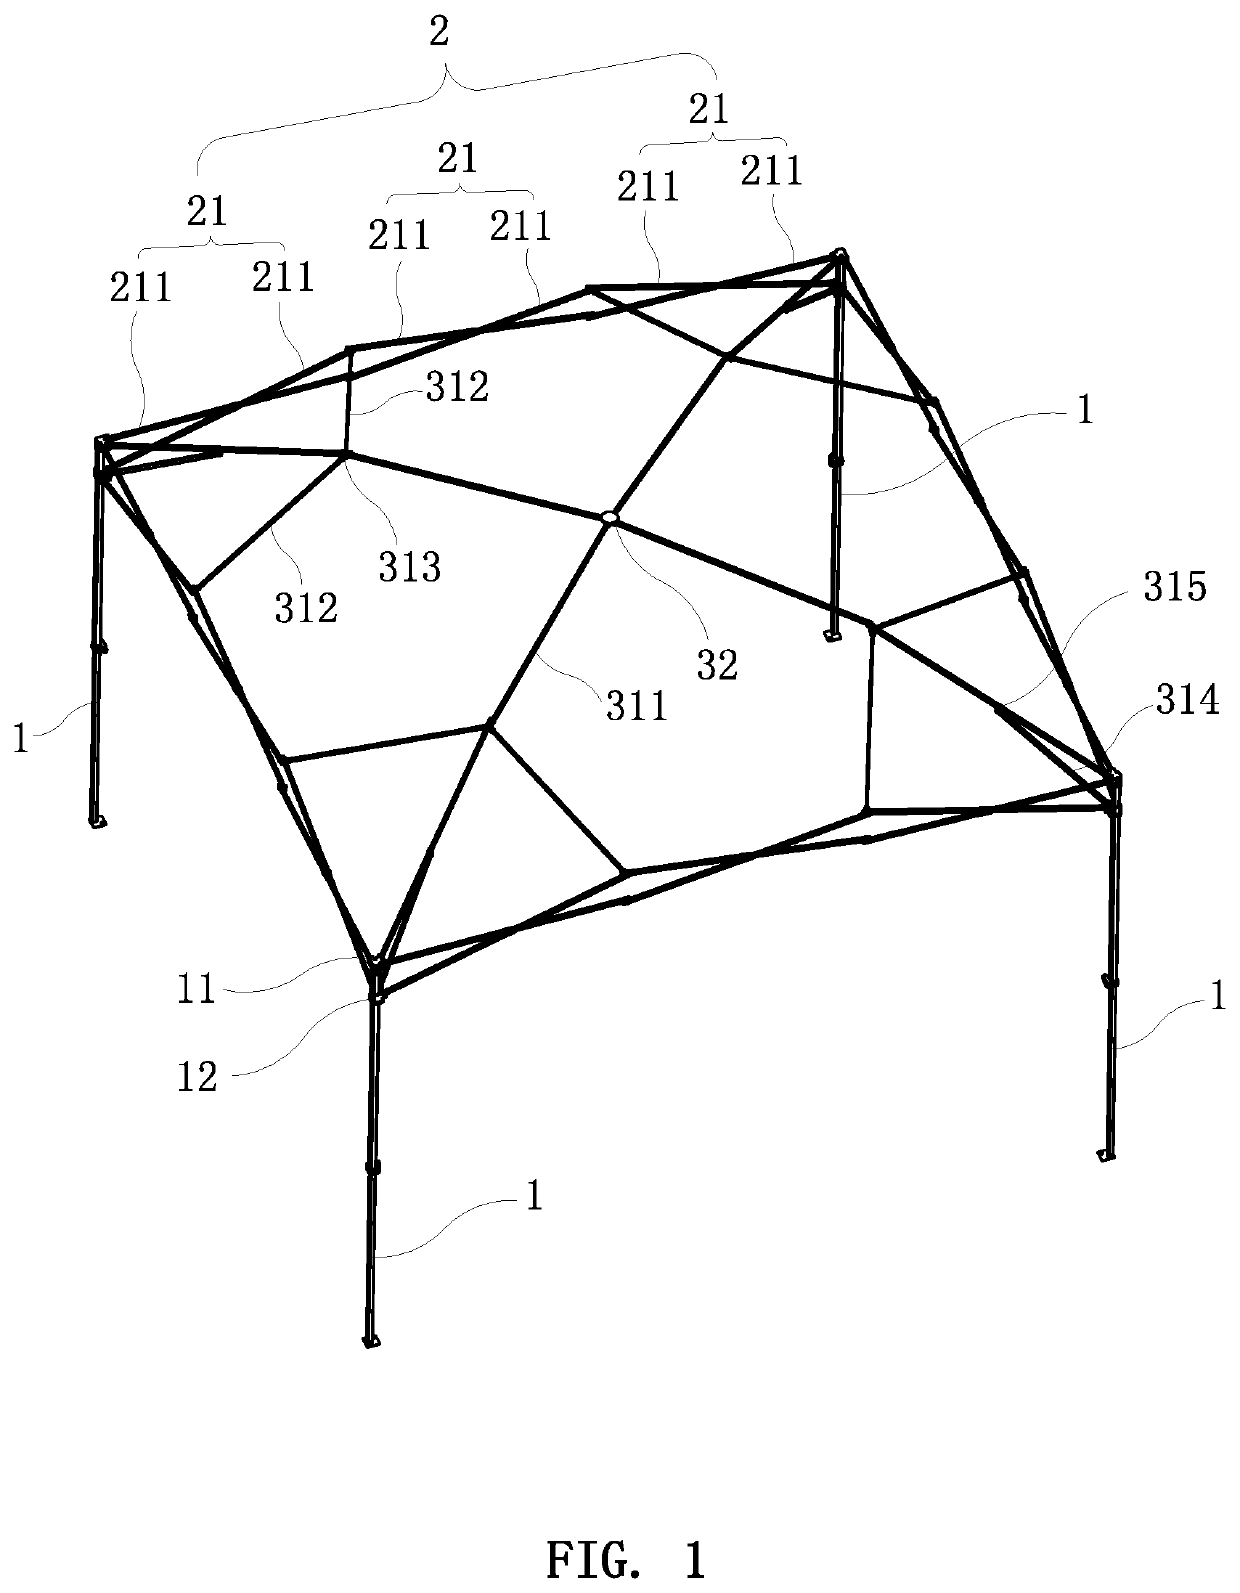 Pole frame structure of foldable tent